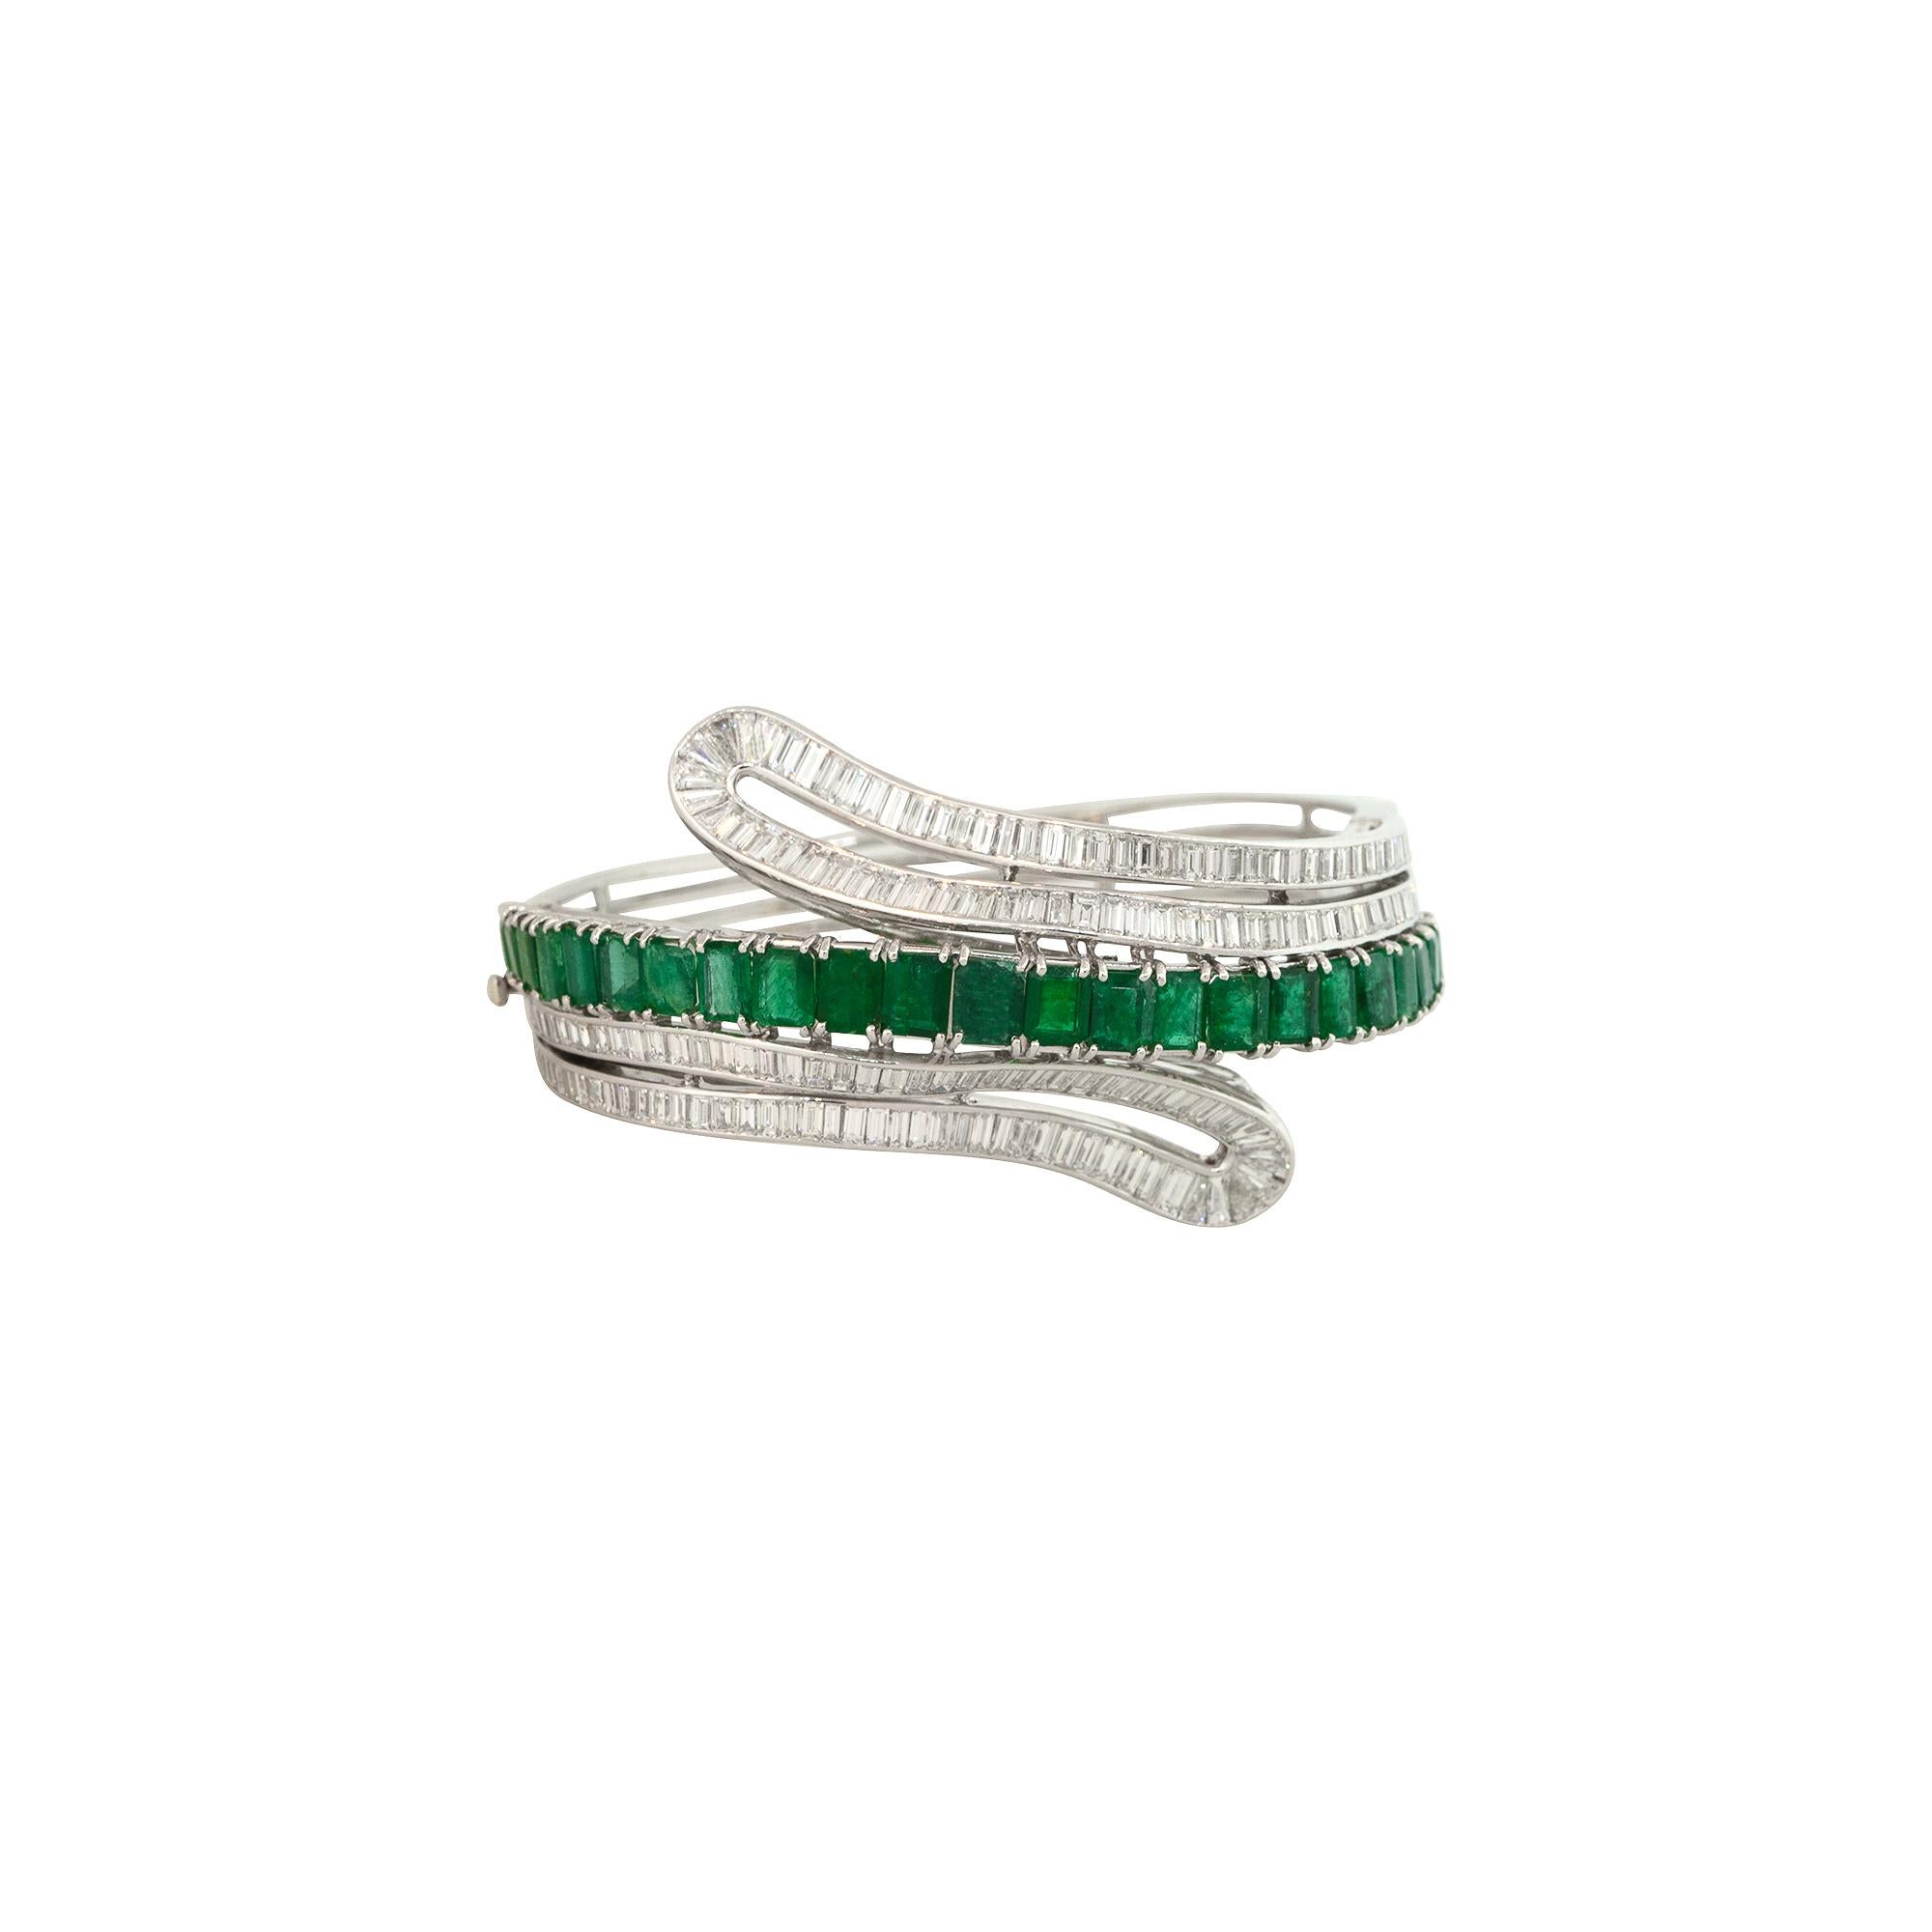 18k White Gold 7.0ctw Emerald and Diamond Bangle Bracelet

Material: 18k White Gold
Gemstone Details: Approximately 7.0ctw of Emerald Cut Emeralds
Diamond Details: Approximately 3.8ctw of Emerald Cut Diamonds
Total Weight: 64.9g (41.9dwts)
Size: